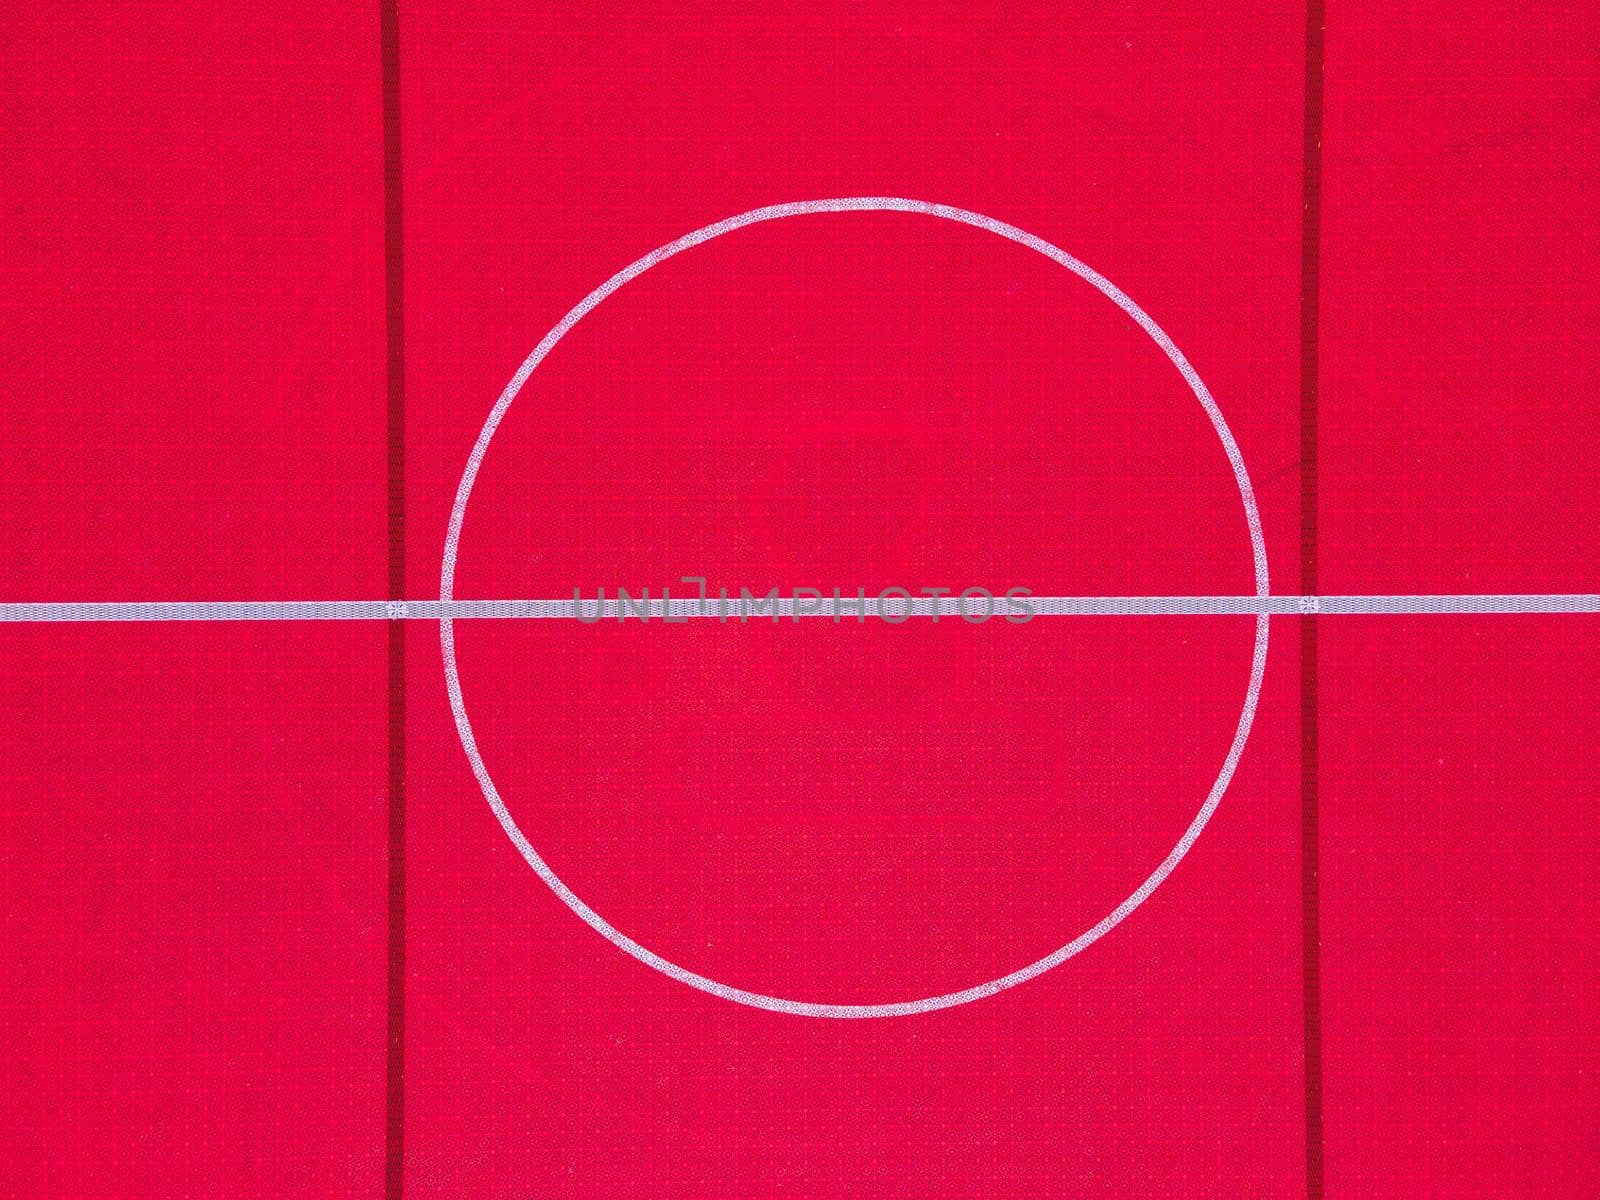 Plastic outdoor basketball court  floor, detail. Outdoor sport ground with red surface for playing basketball  in urban area, above.